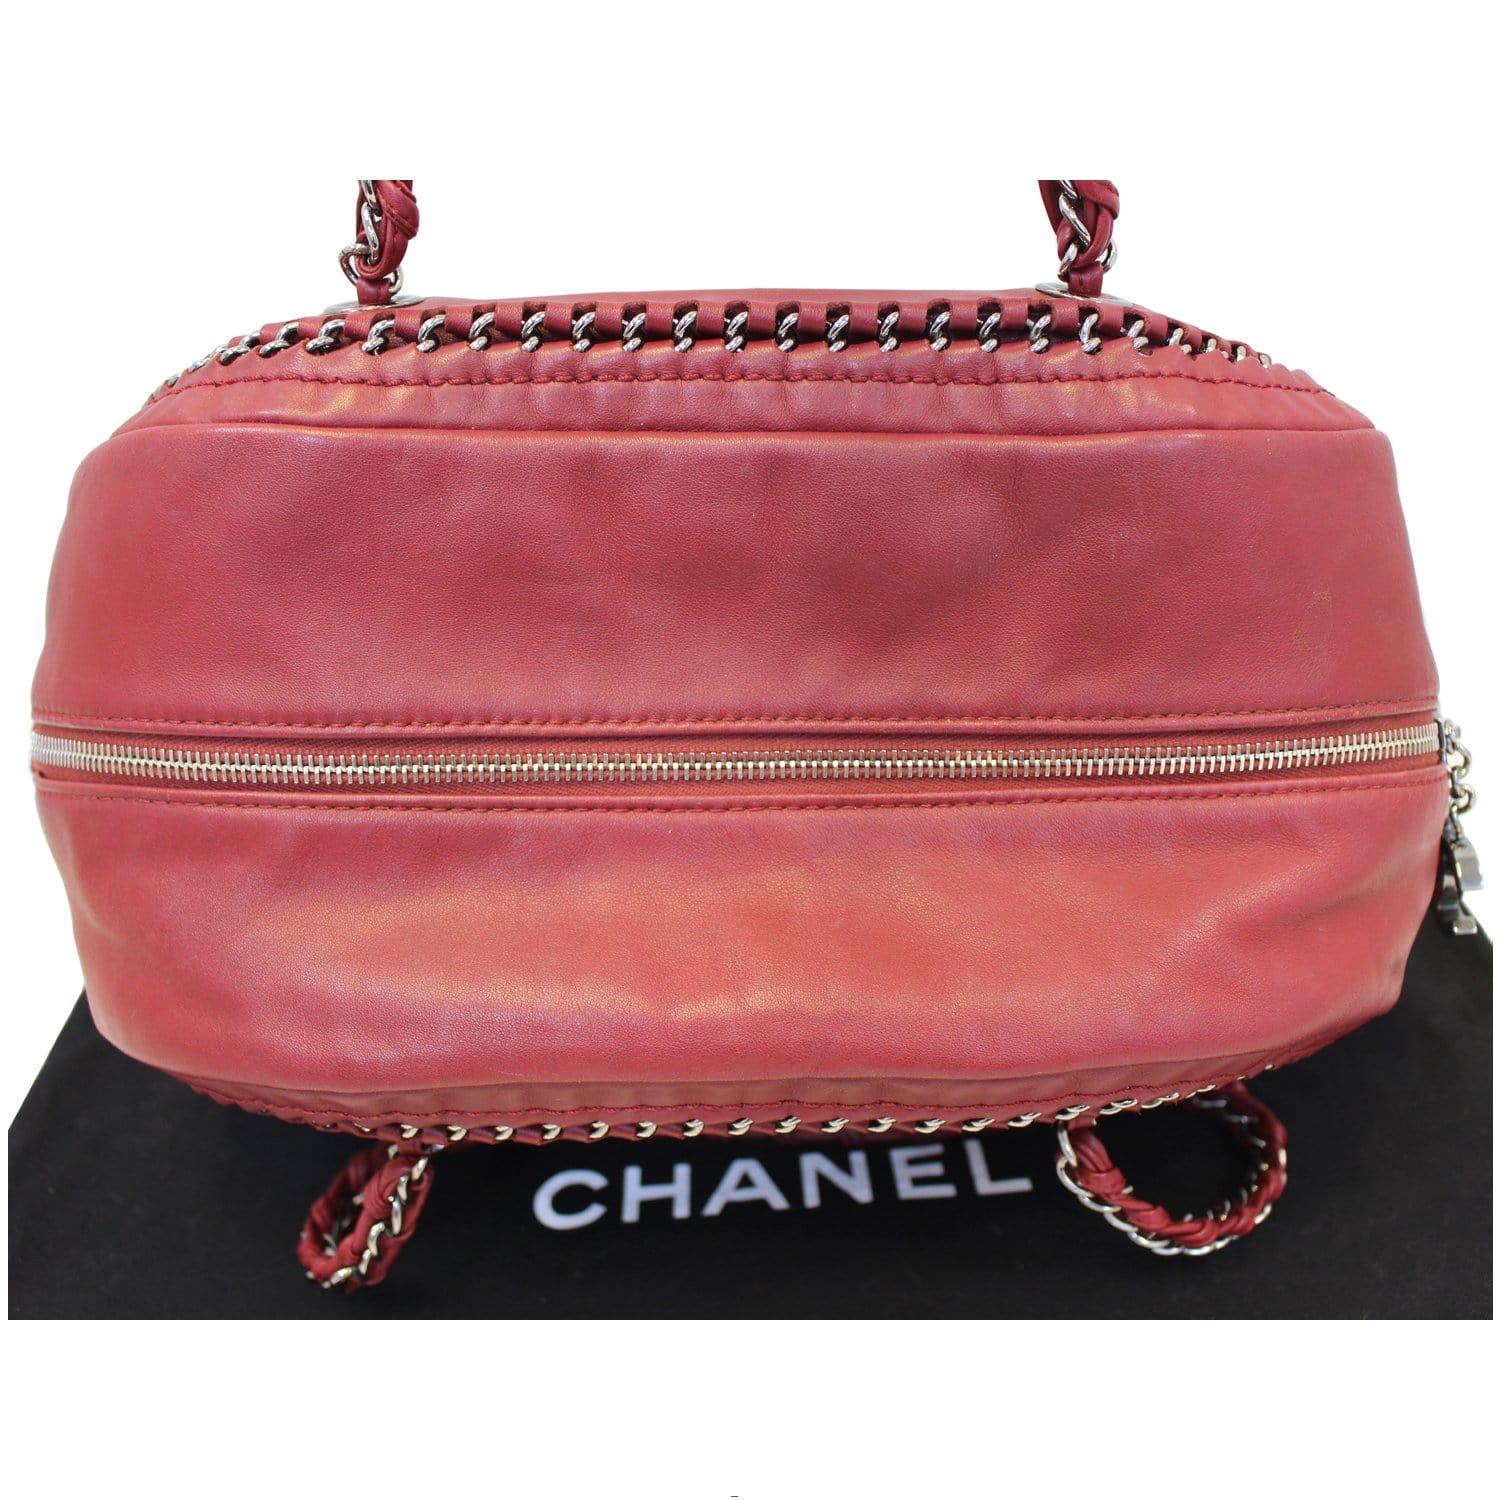 Chanel Smooth Calfskin Petit Luxe Ligne Bowler Satchel Bag Red